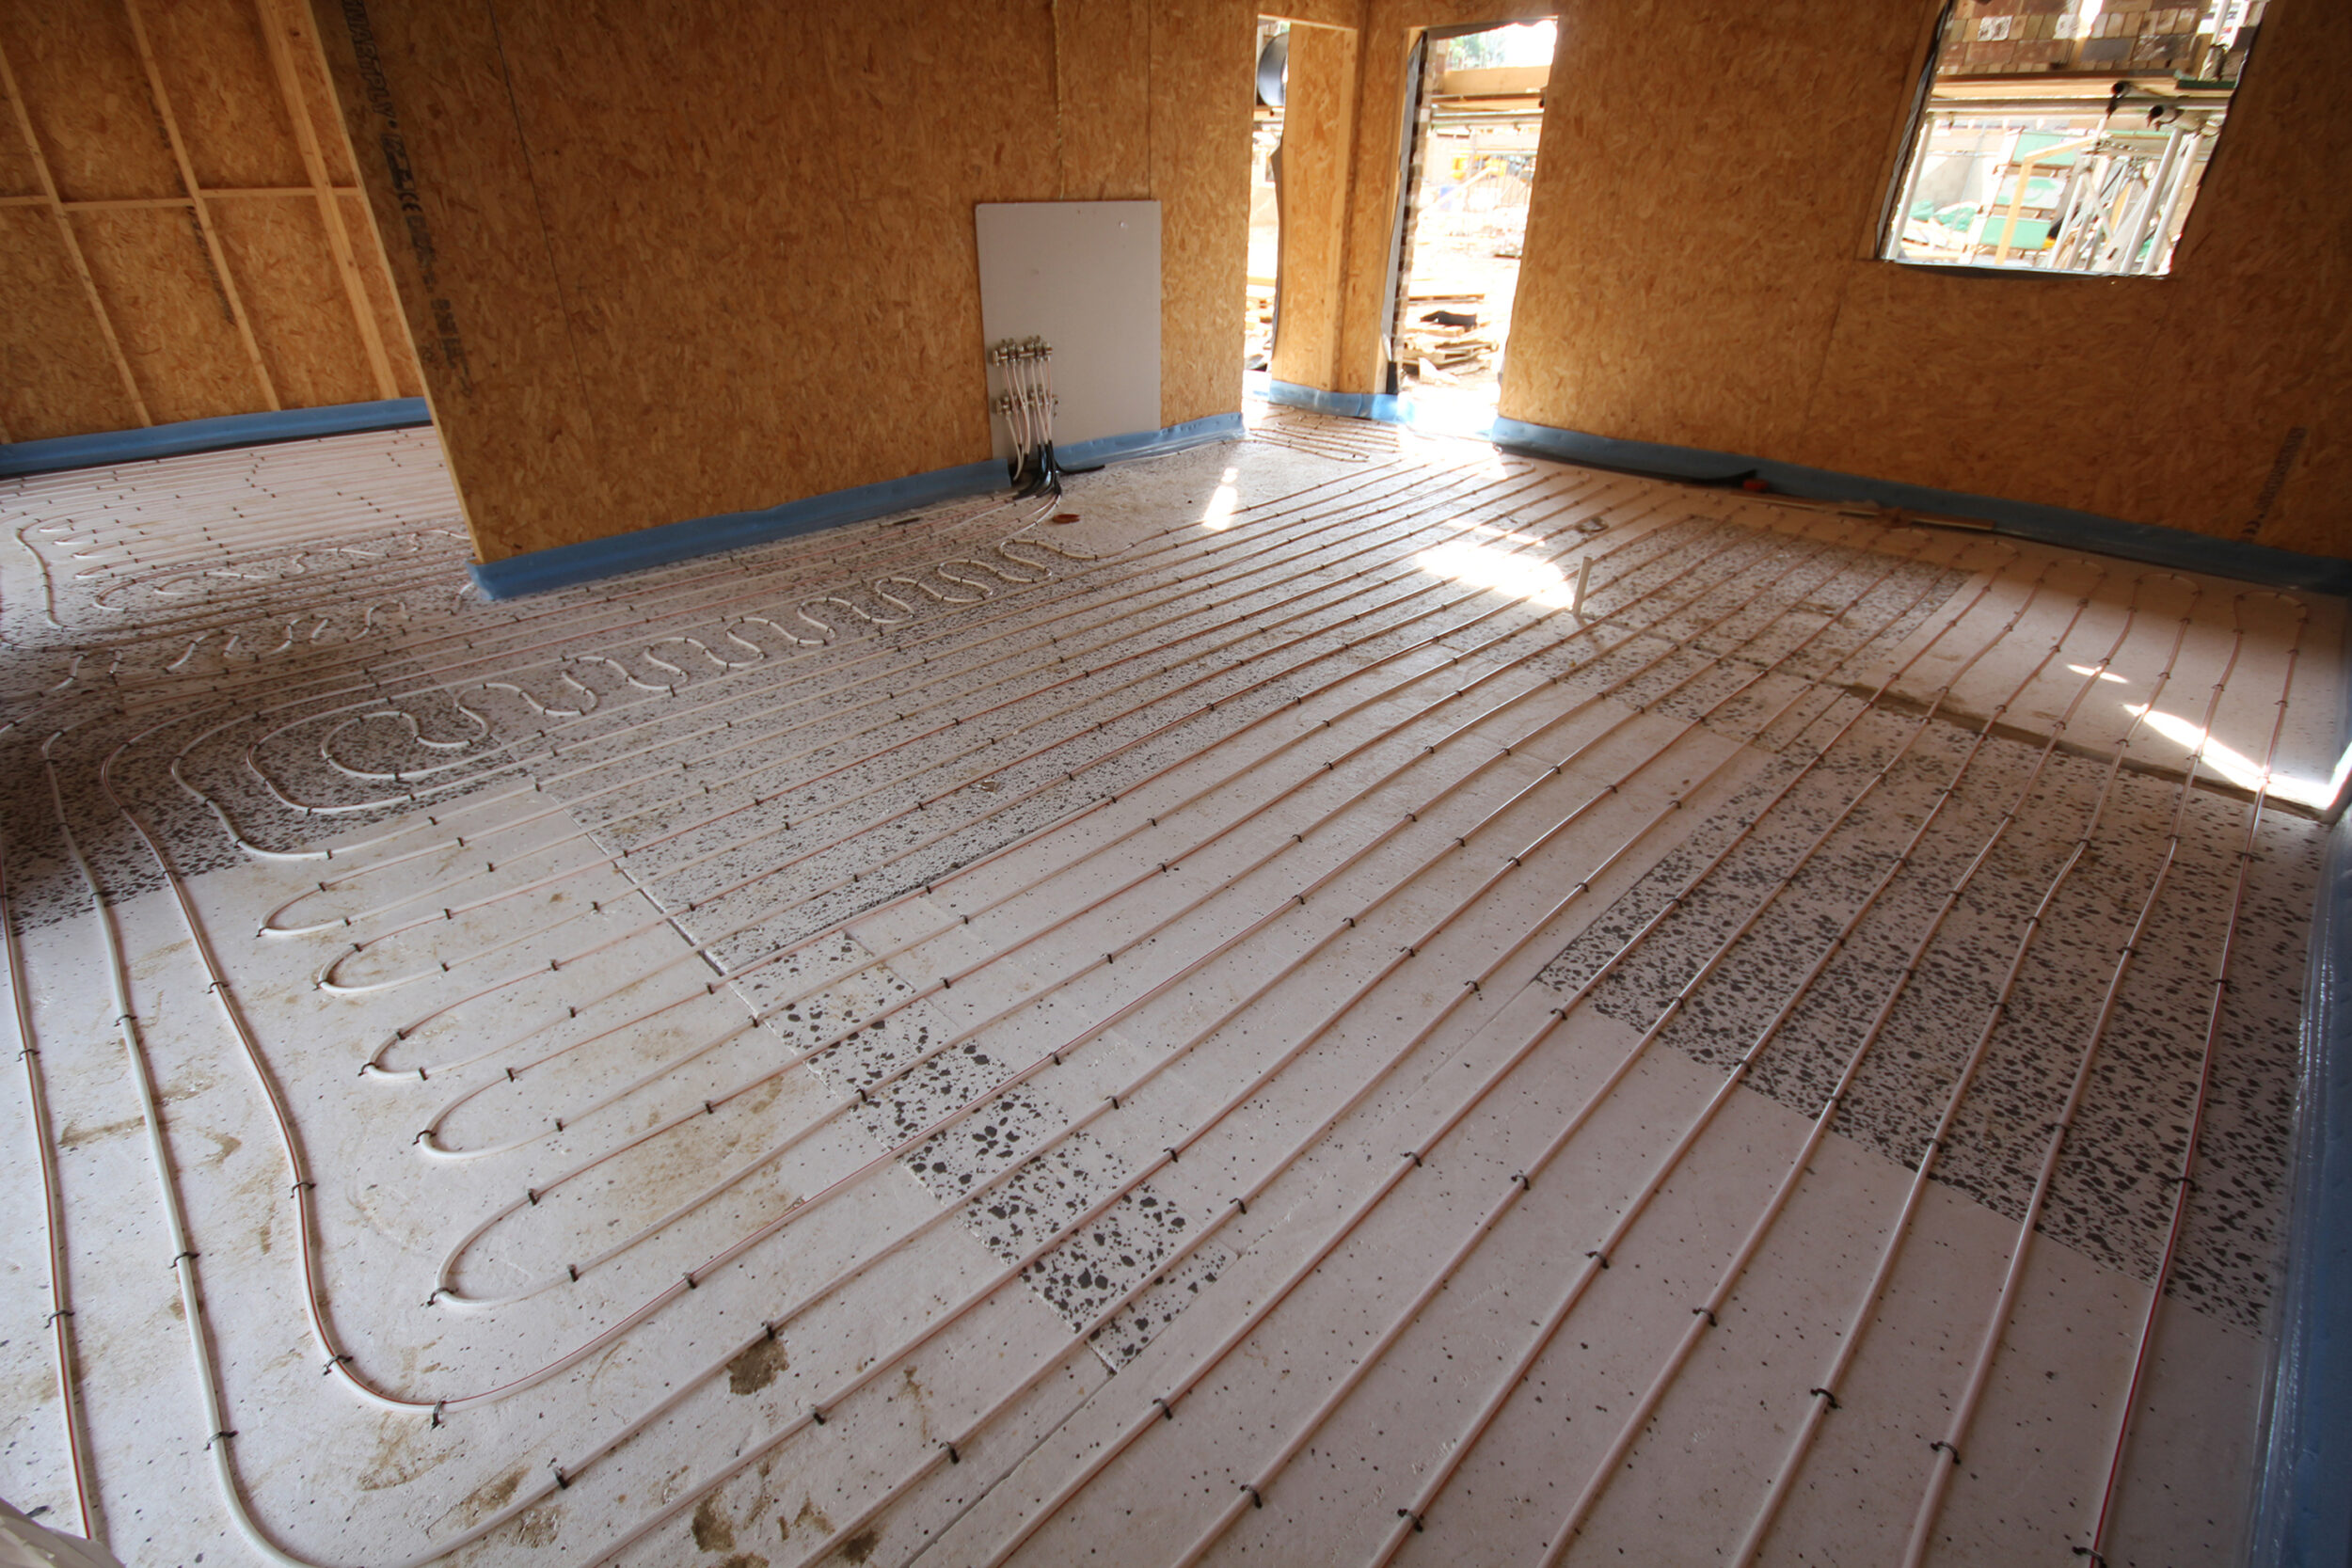 CIRCOFLO UFH SYSTEM SELECTED FOR STYLISH YORKSHIRE RESIDENTIAL SCHEME